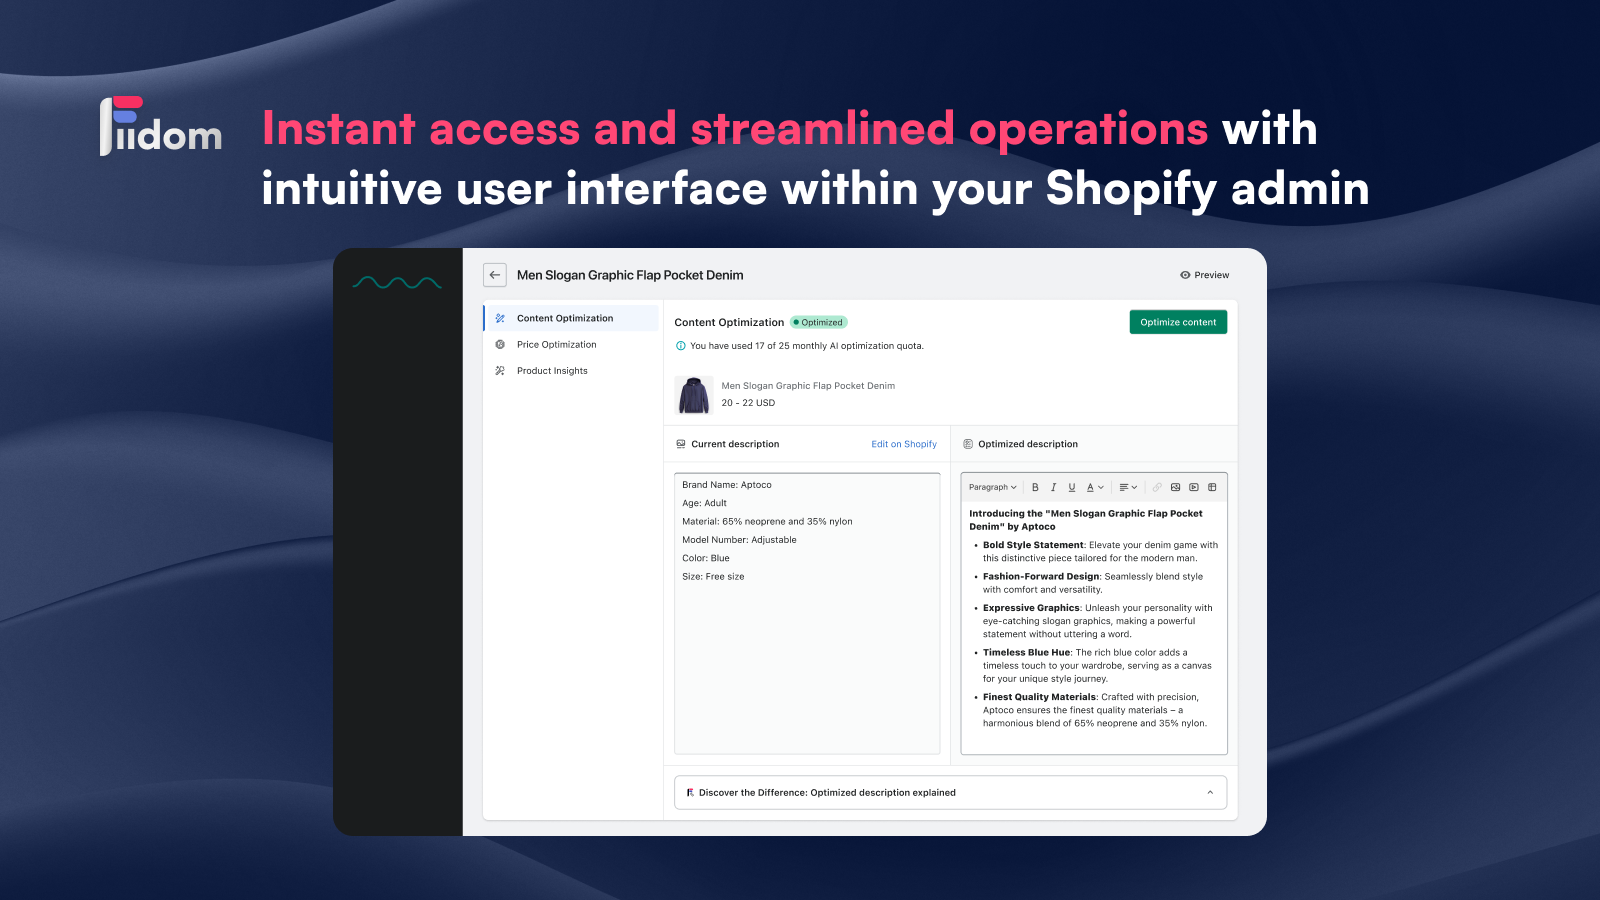 Work directly with intuitive UI within your Shopify admin